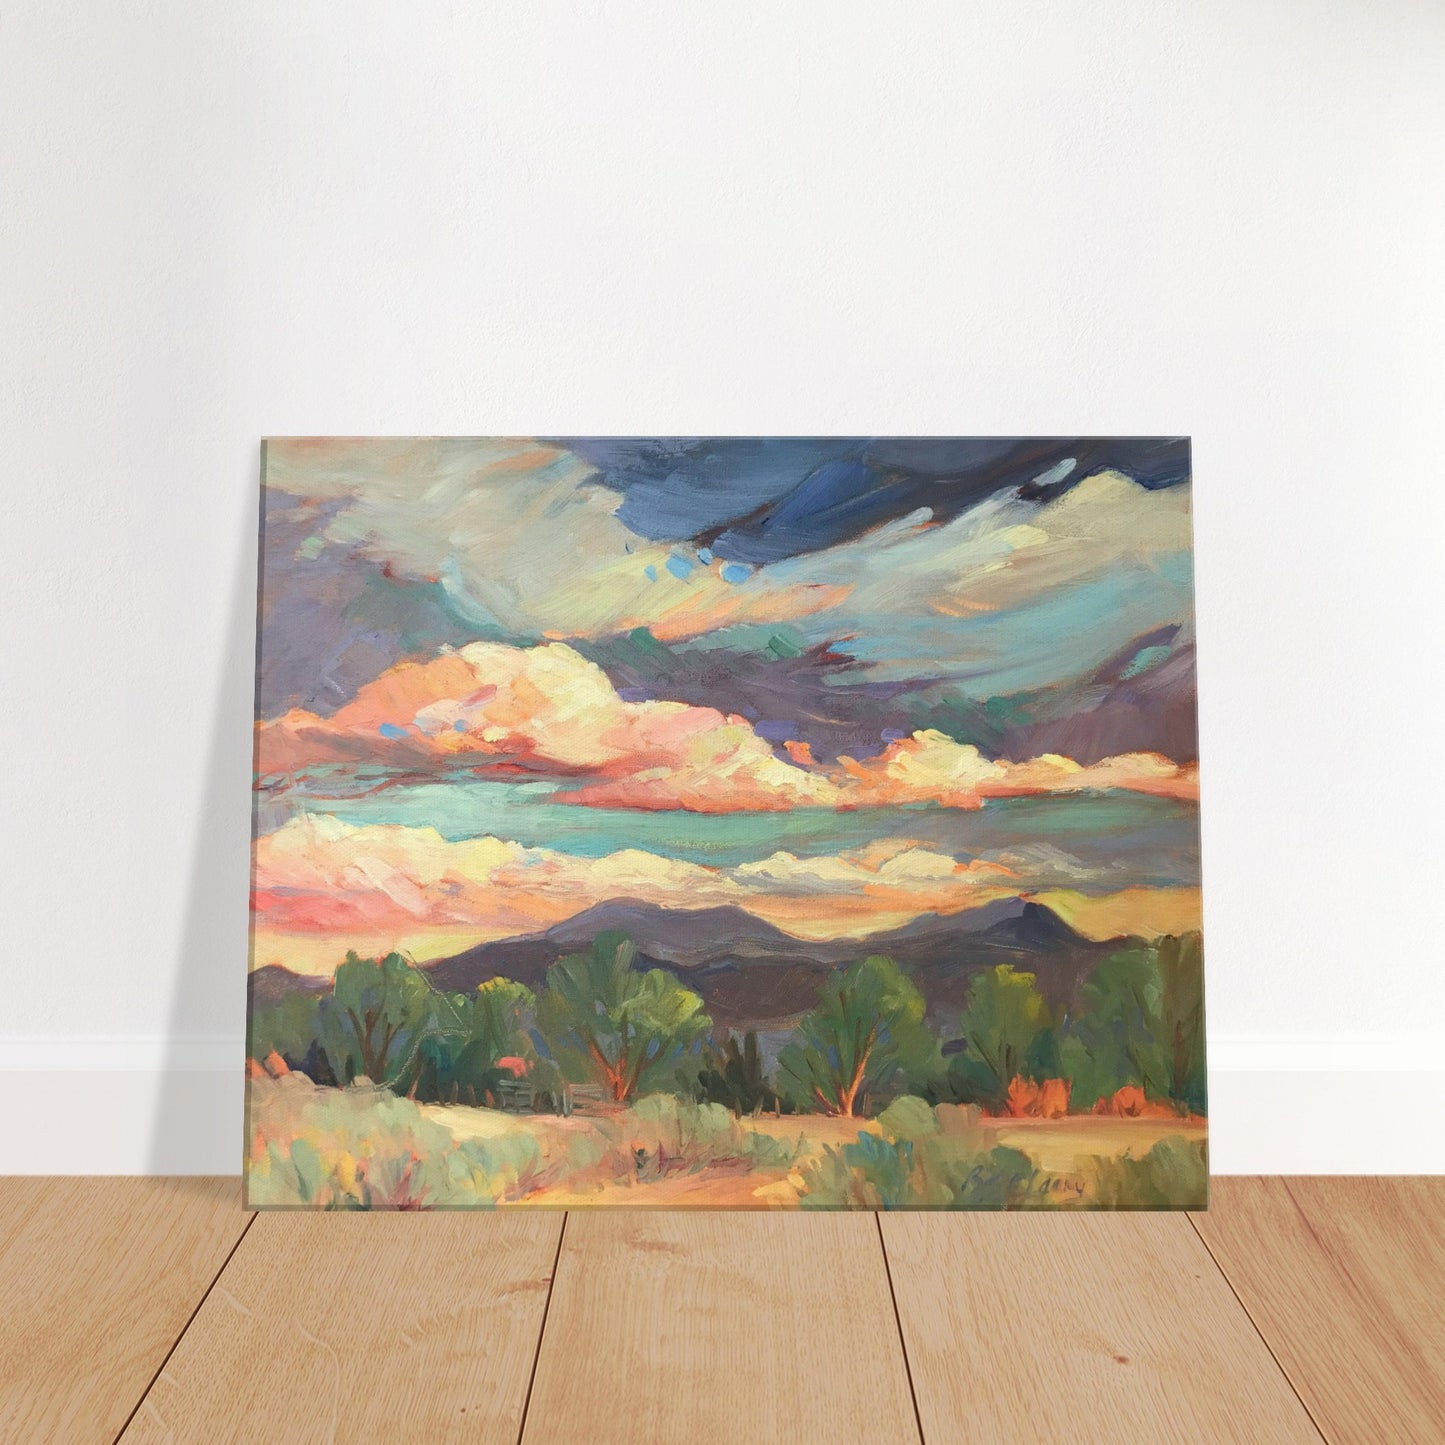 "New Mexico Sky" Art Print 16x20 inch on Canvas Barbara Cleary Designs